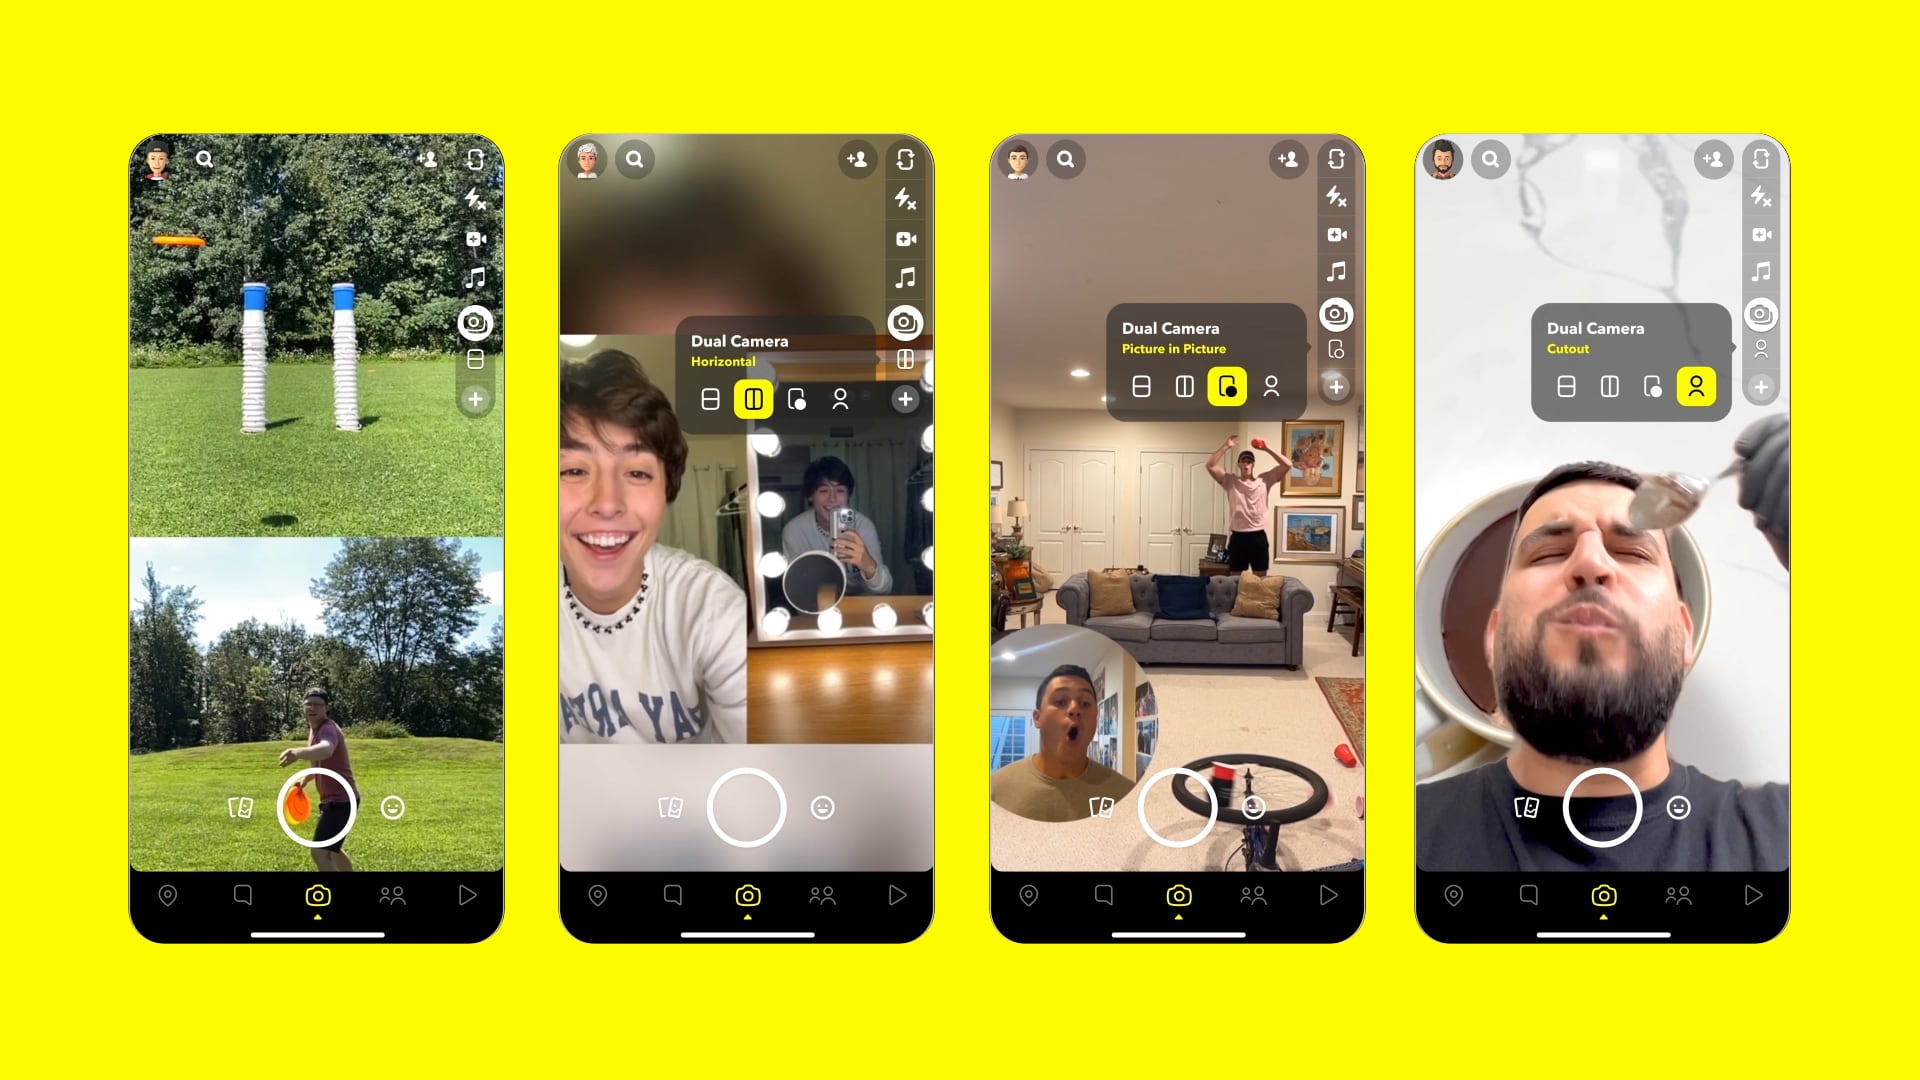 Snapchat Debuts New Dual Camera Feature on iPhone